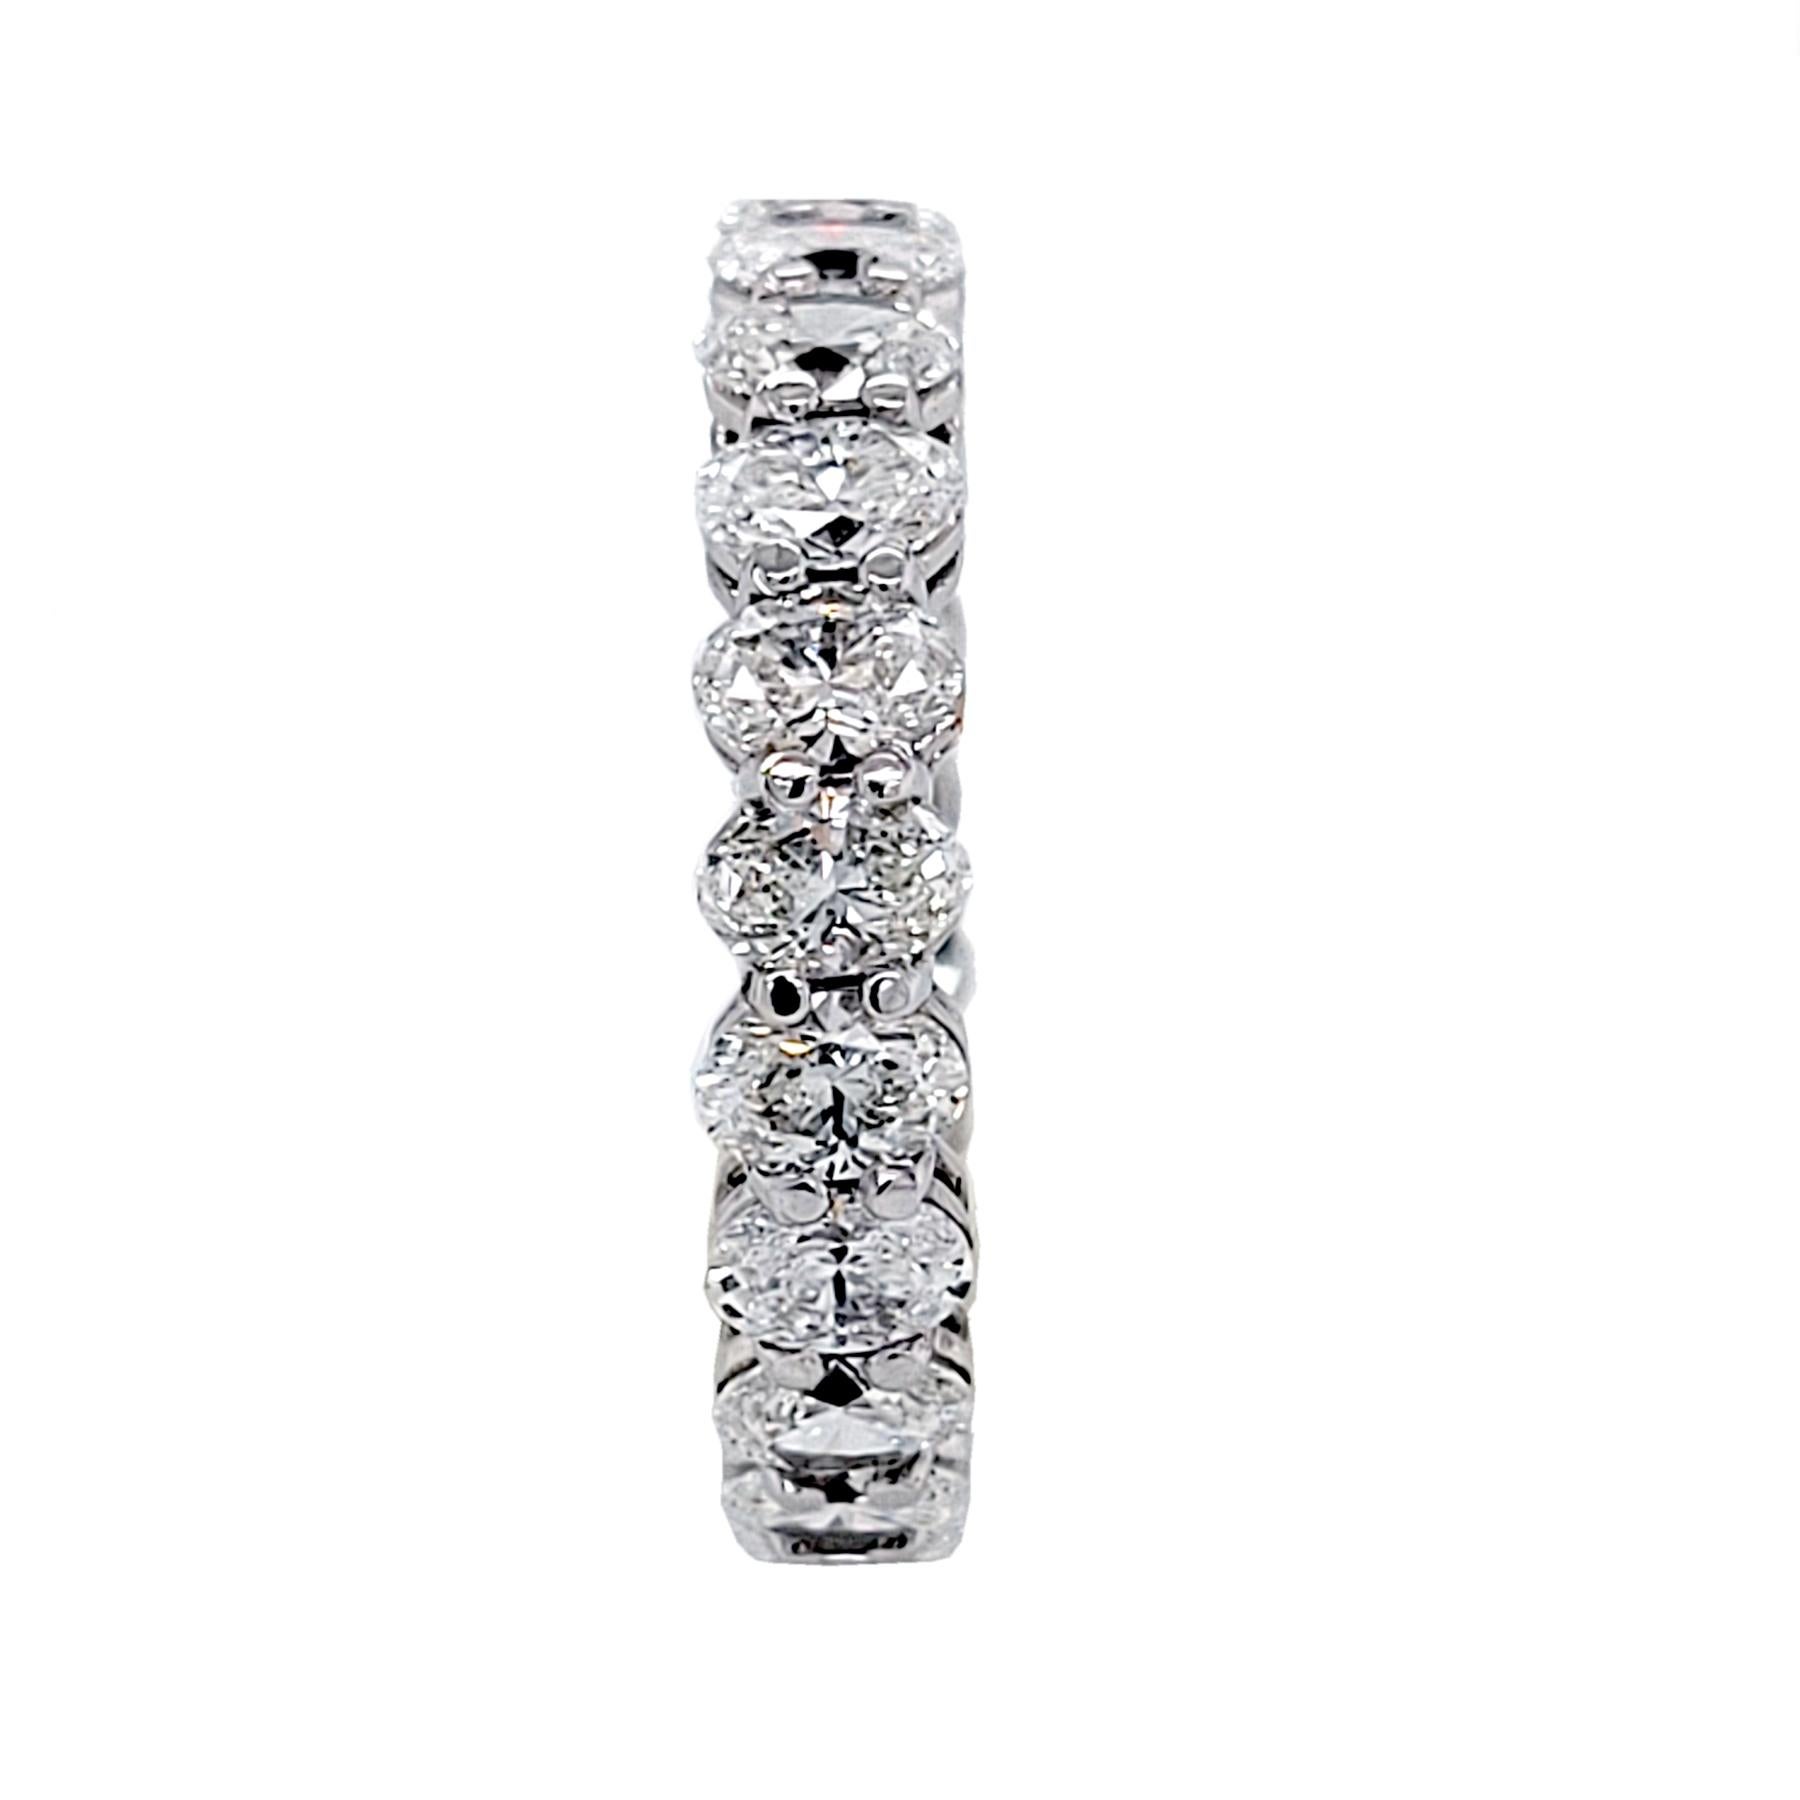 This beautiful Eternity Ring is made of 18K Gold with 21 perfectly matched (VS/E-F)  Oval Brilliant Diamonds Set in Shared Prong Mode.
Total Weight of diamonds: 2.92 Ct 
Total Weight of the Ring:  18K Gold, 3.50 Gr
Ring Size: 6.25